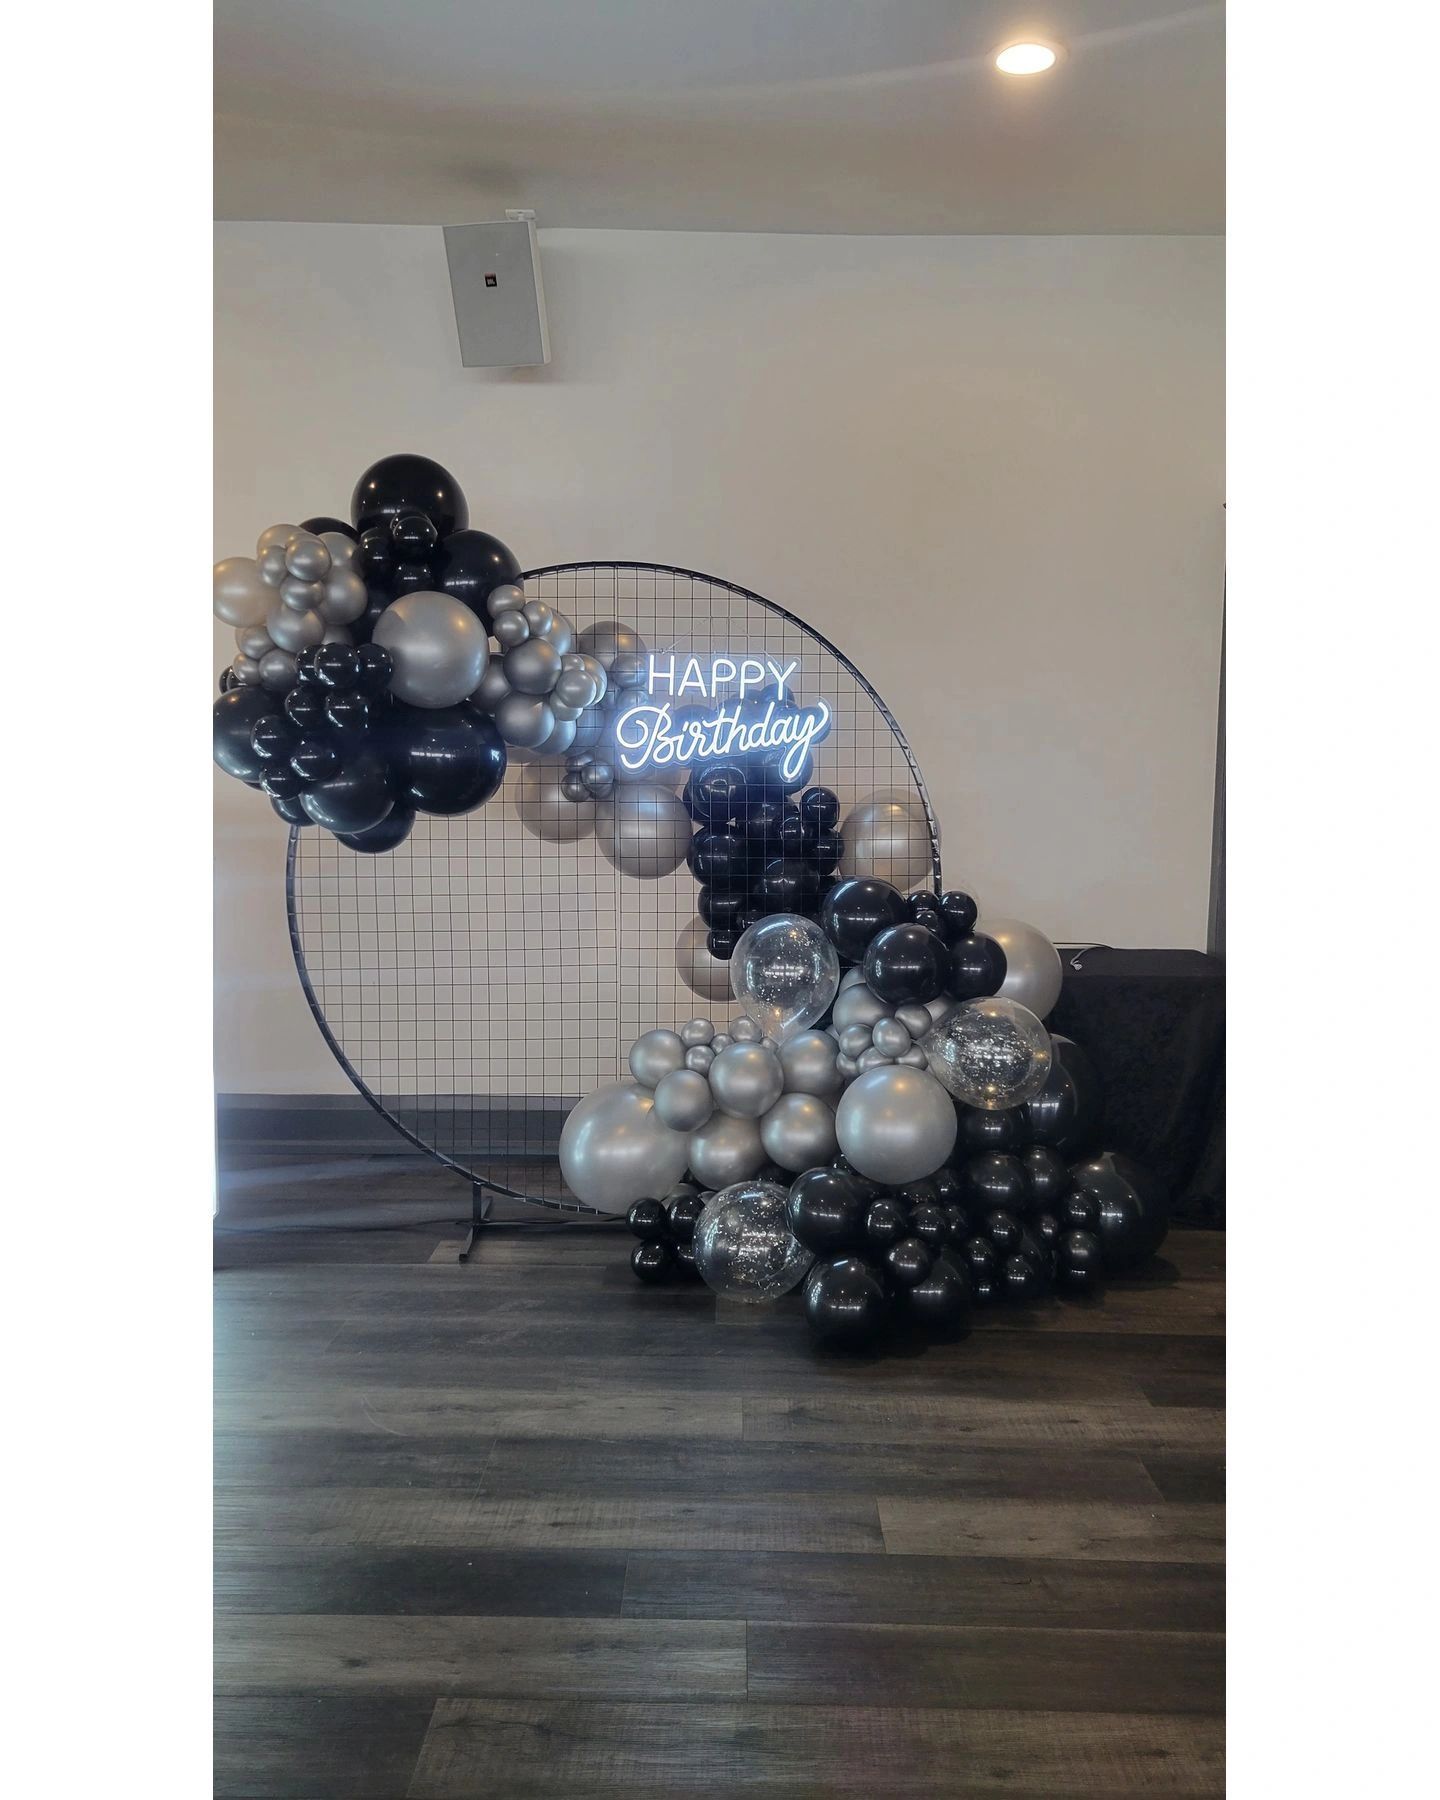 Brown Sugar Decors - Wedding and Balloon Decorations, Event Draping